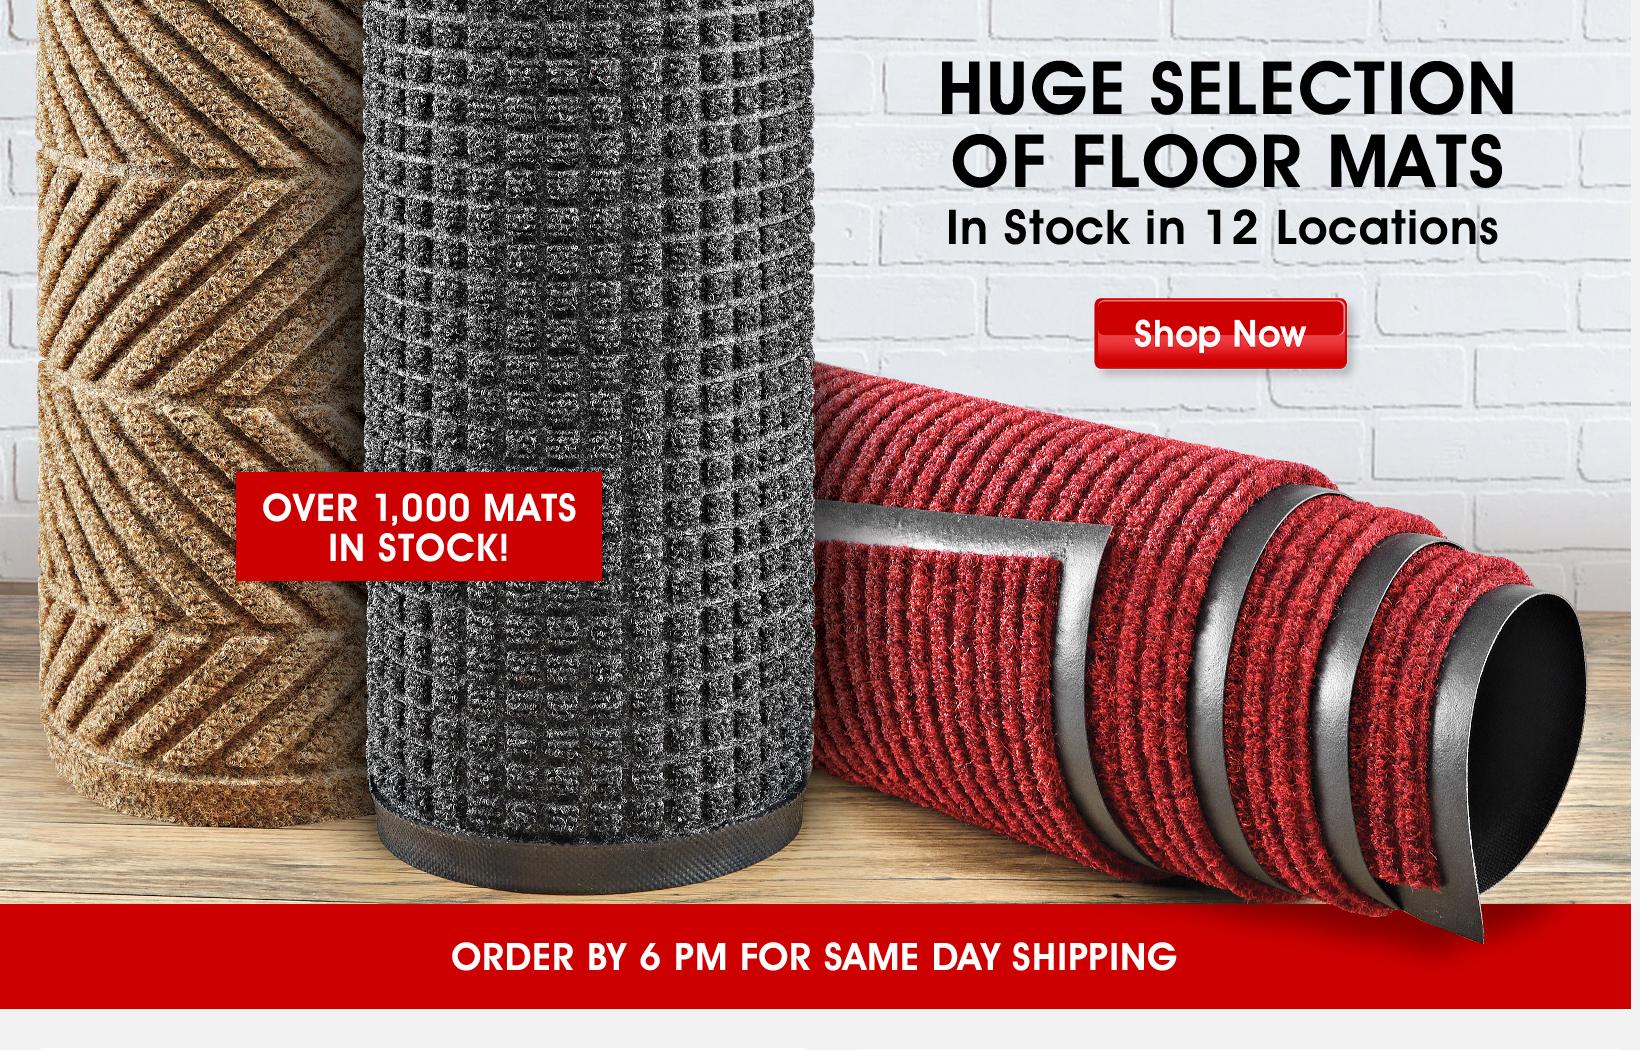 Huge Selection
of Floor Mats - In Stock in 12 Locations - Shop Now - OVER 1,000 MATS ALWAYS IN STOCK! – ORDER BY 6 PM FOR SAME DAY SHIPPING